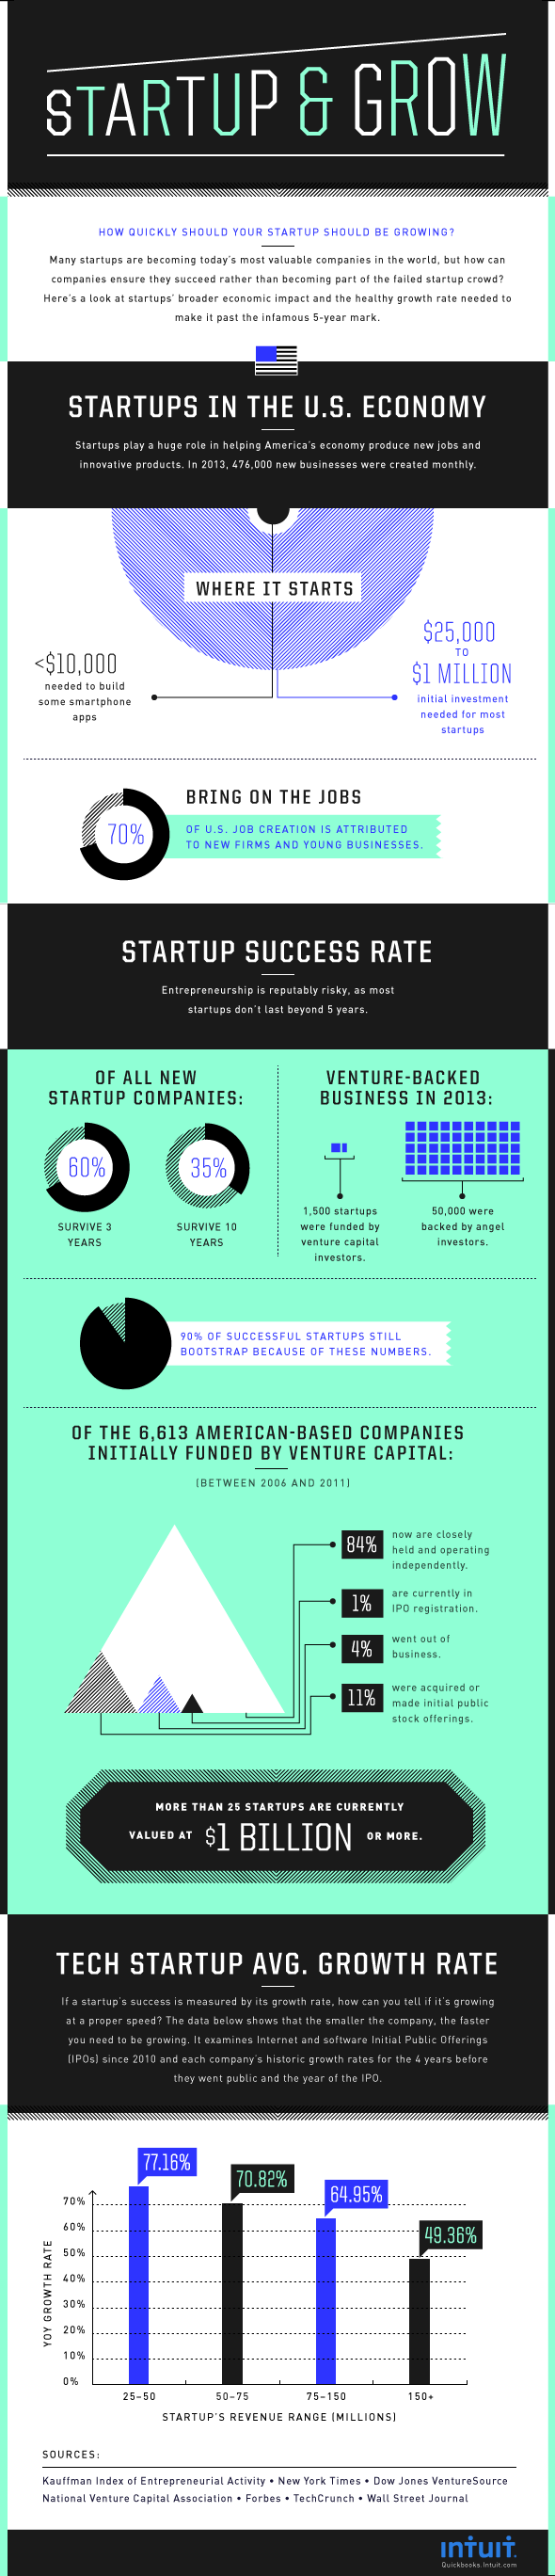 intuit infographic on startups